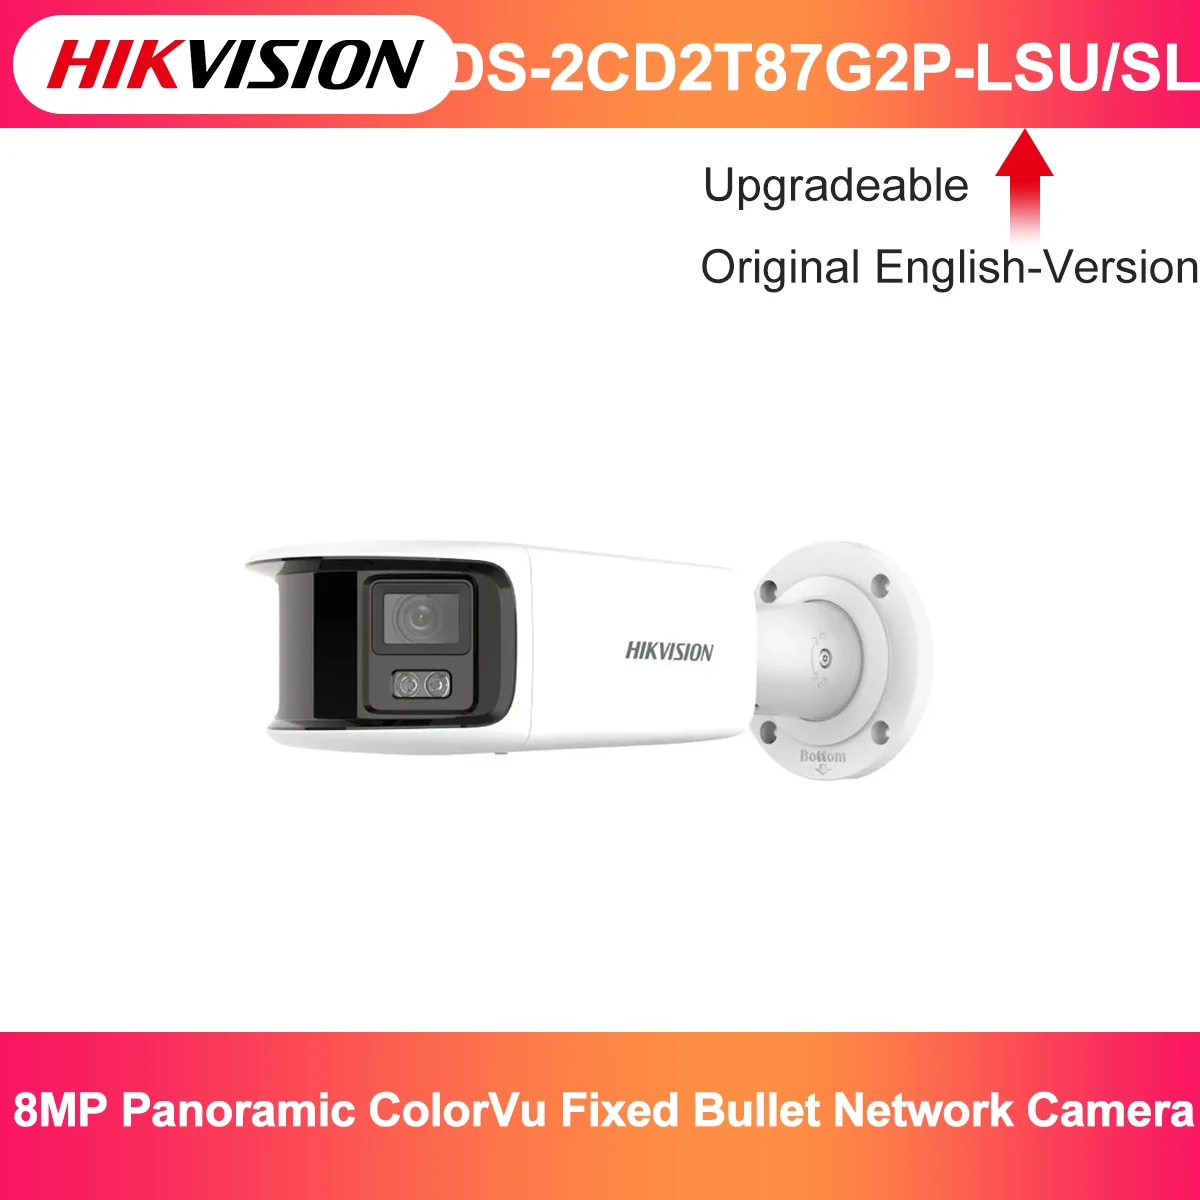 

Free shipping 8MP Panoramic ColorVu Fixed Bullet Network Camera DS-2CD2T87G2P-LSU/SL IP Camera POE Built-in Mic